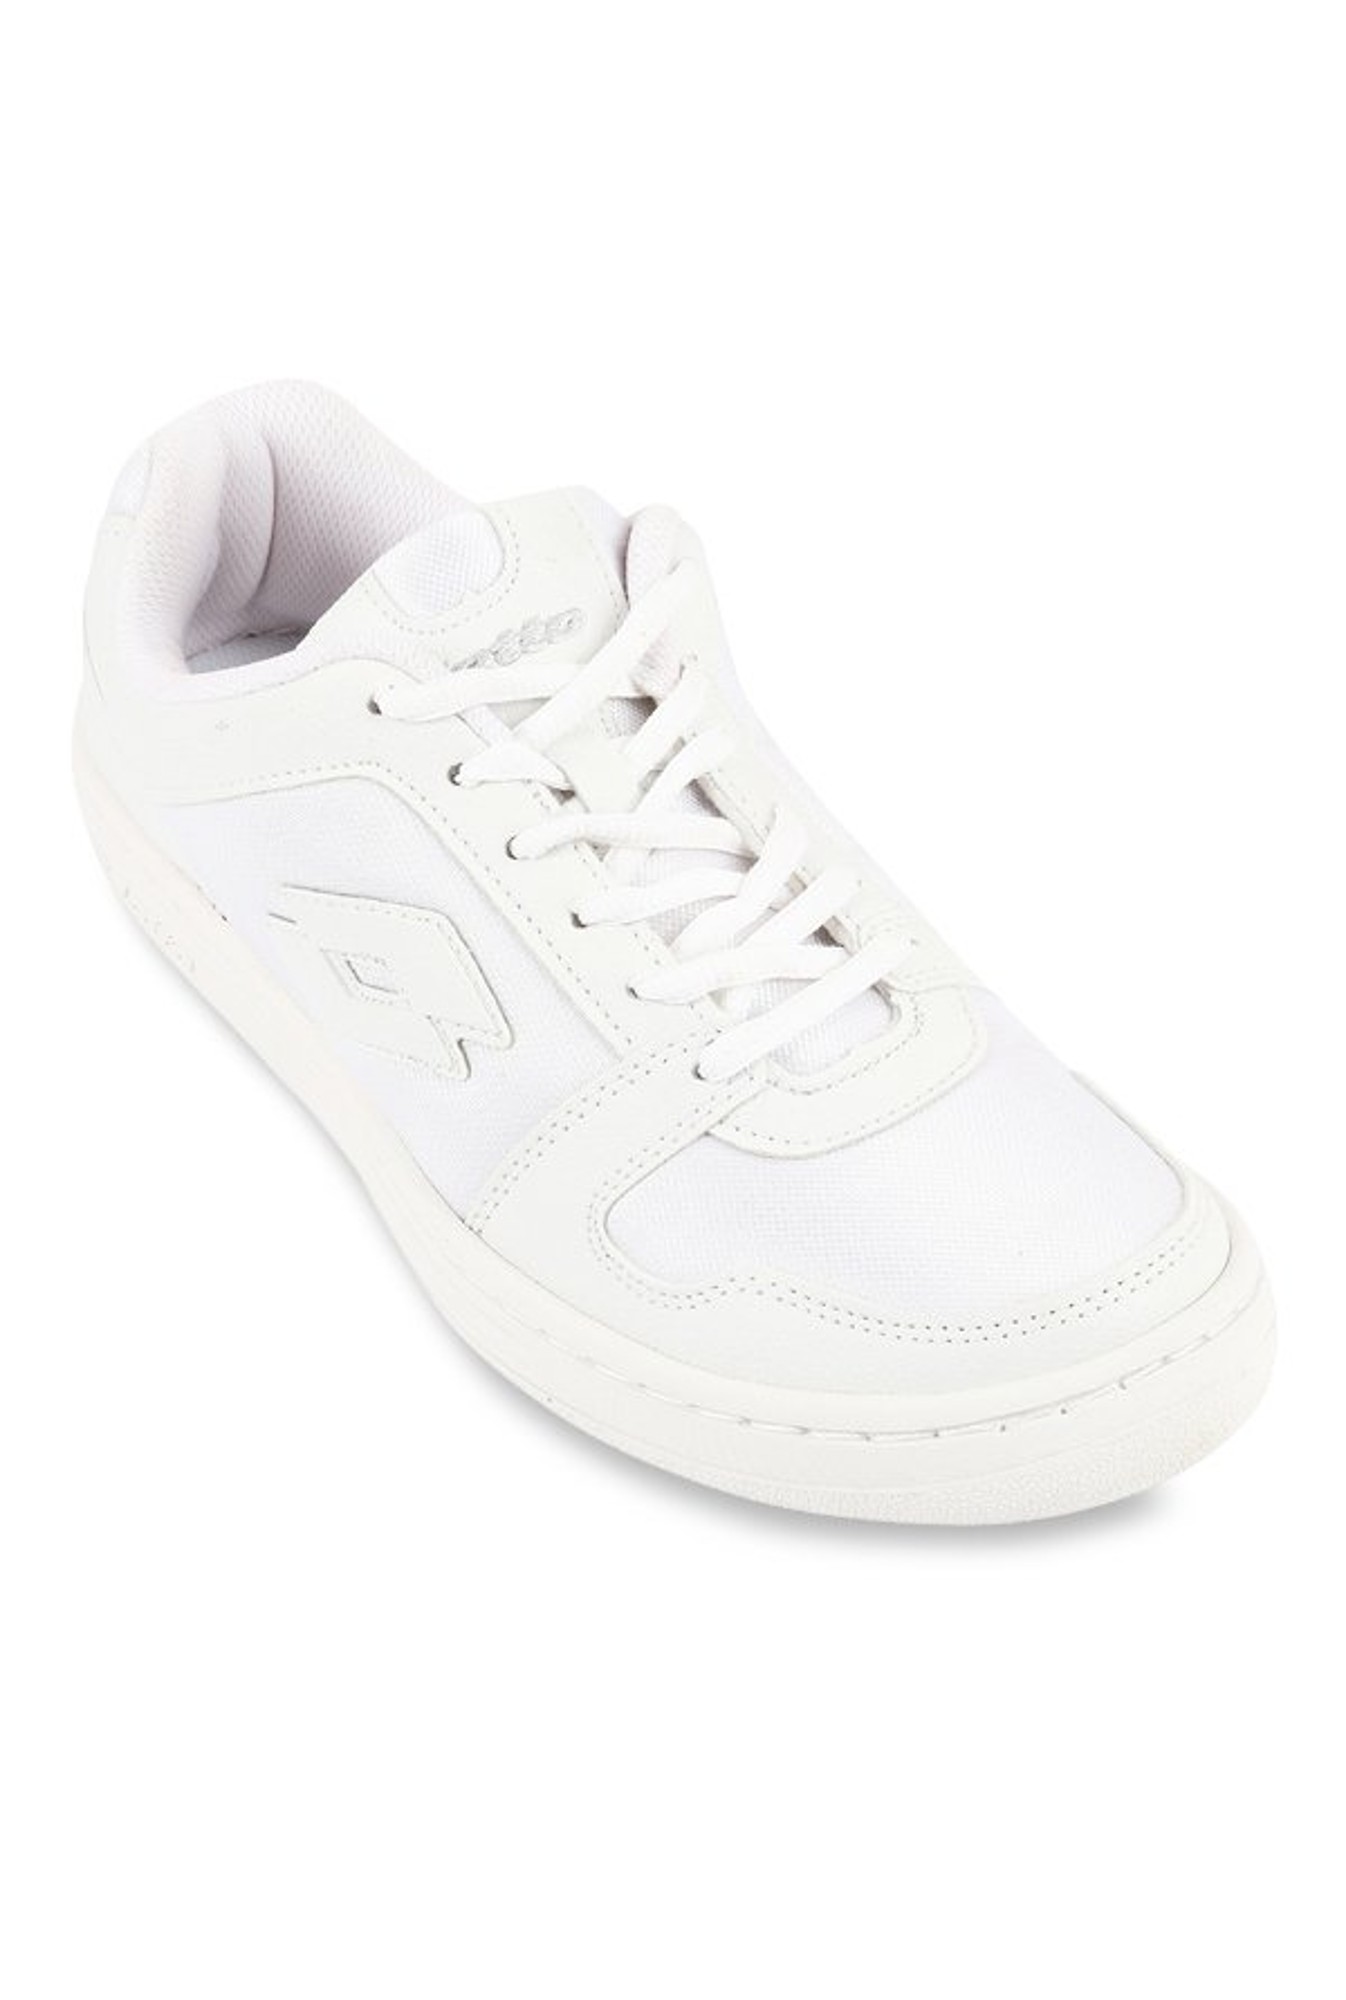 Buy Lotto Ace White Sneakers for Men at 